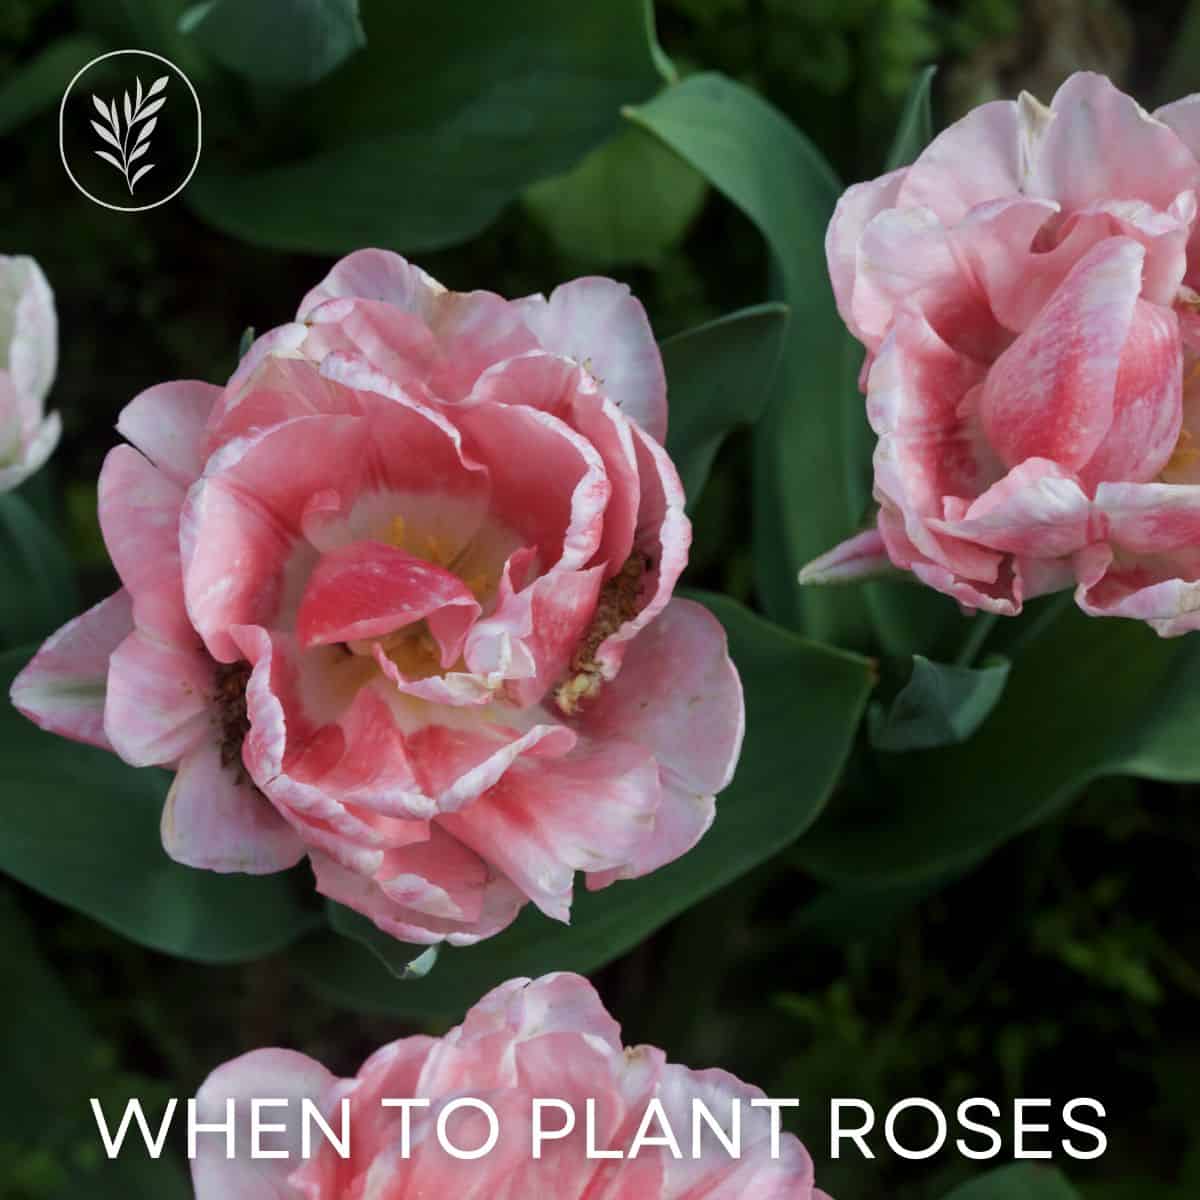 When to plant roses via @home4theharvest